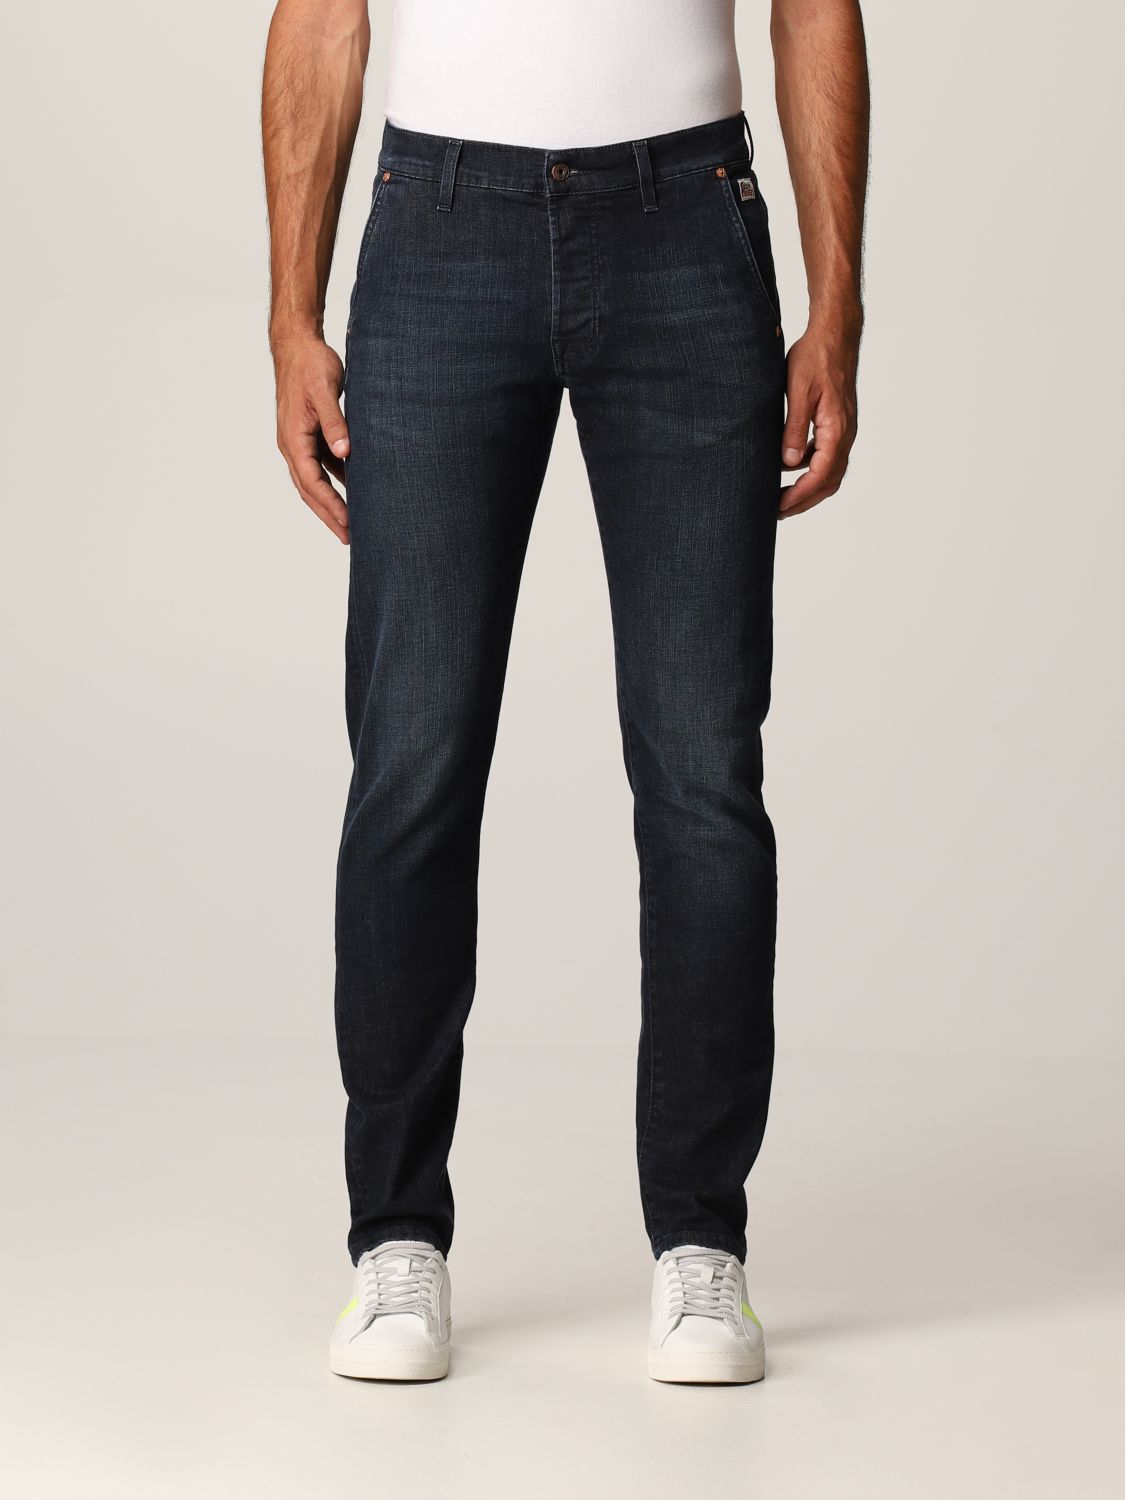 Jeans Roy Rogers: Jeans Roy Rogers in denim stretch denim 1